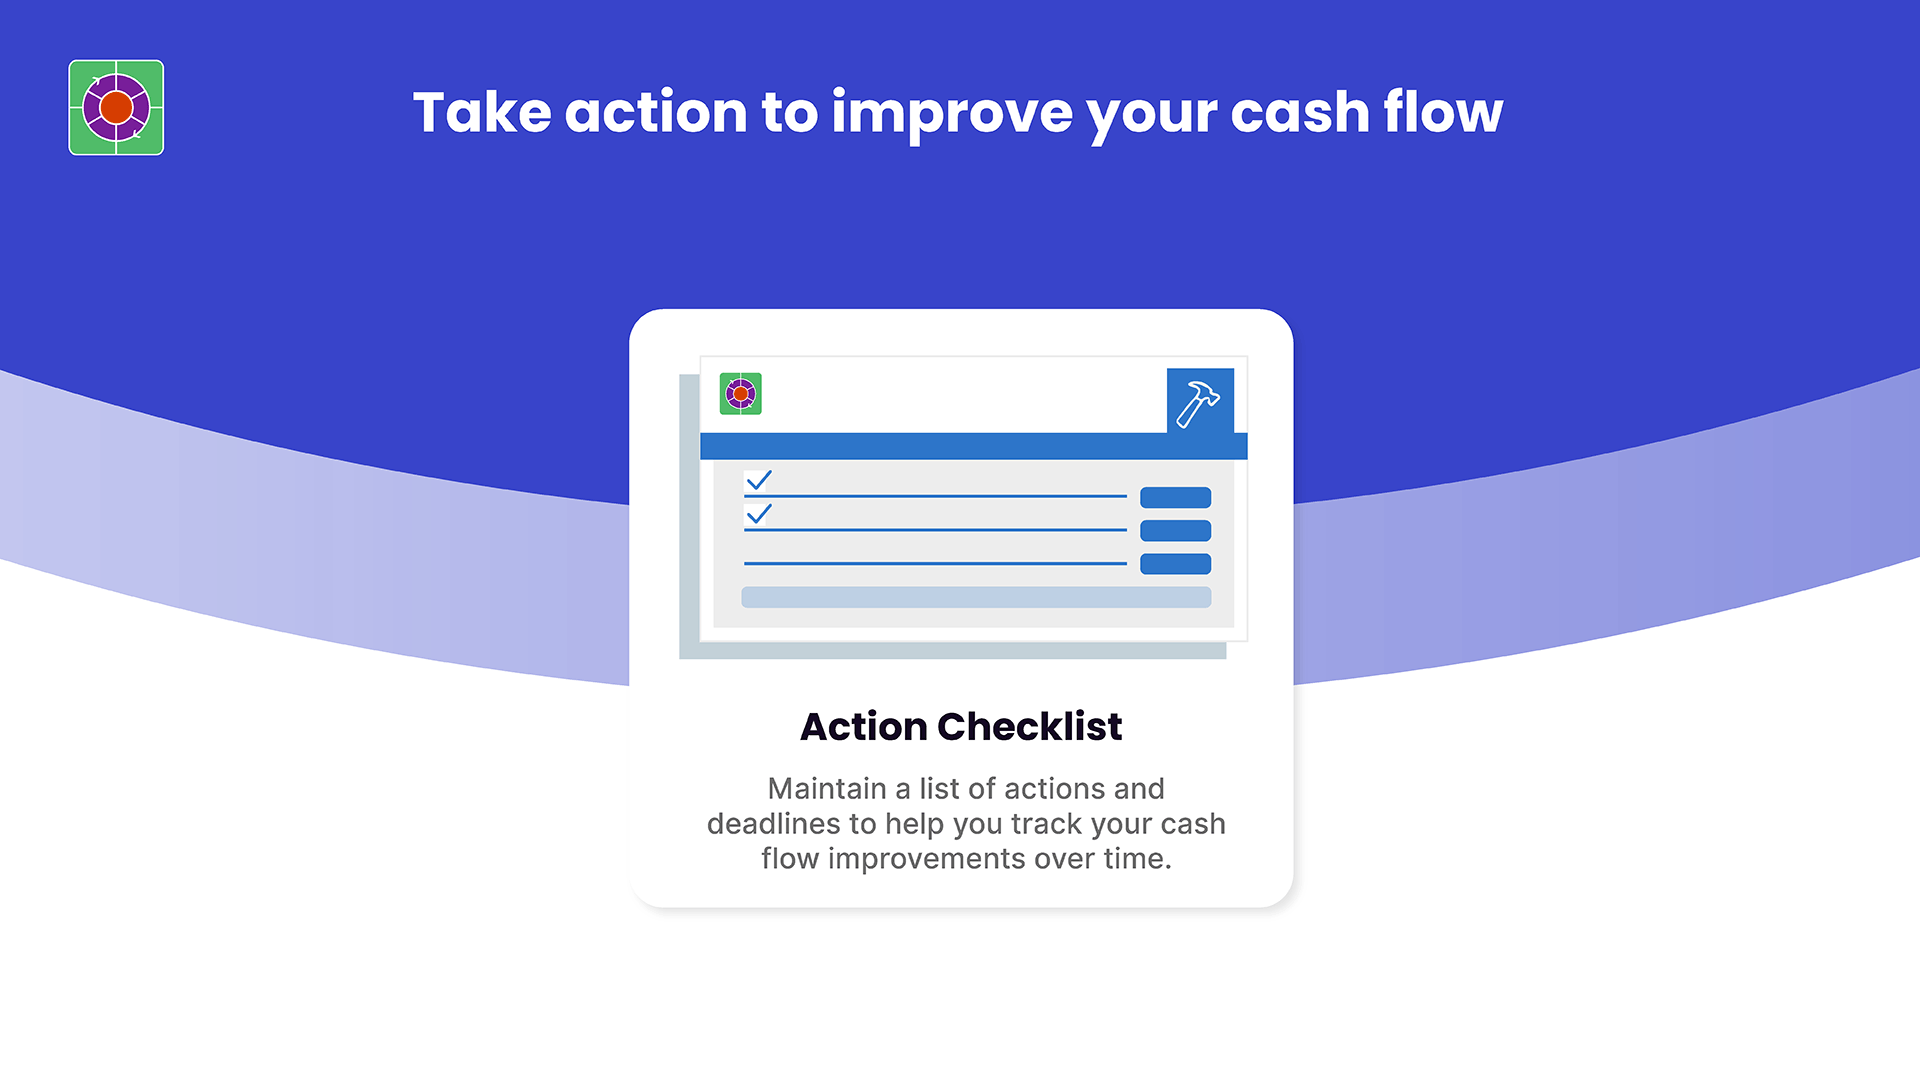 Take action to improve your cash flow